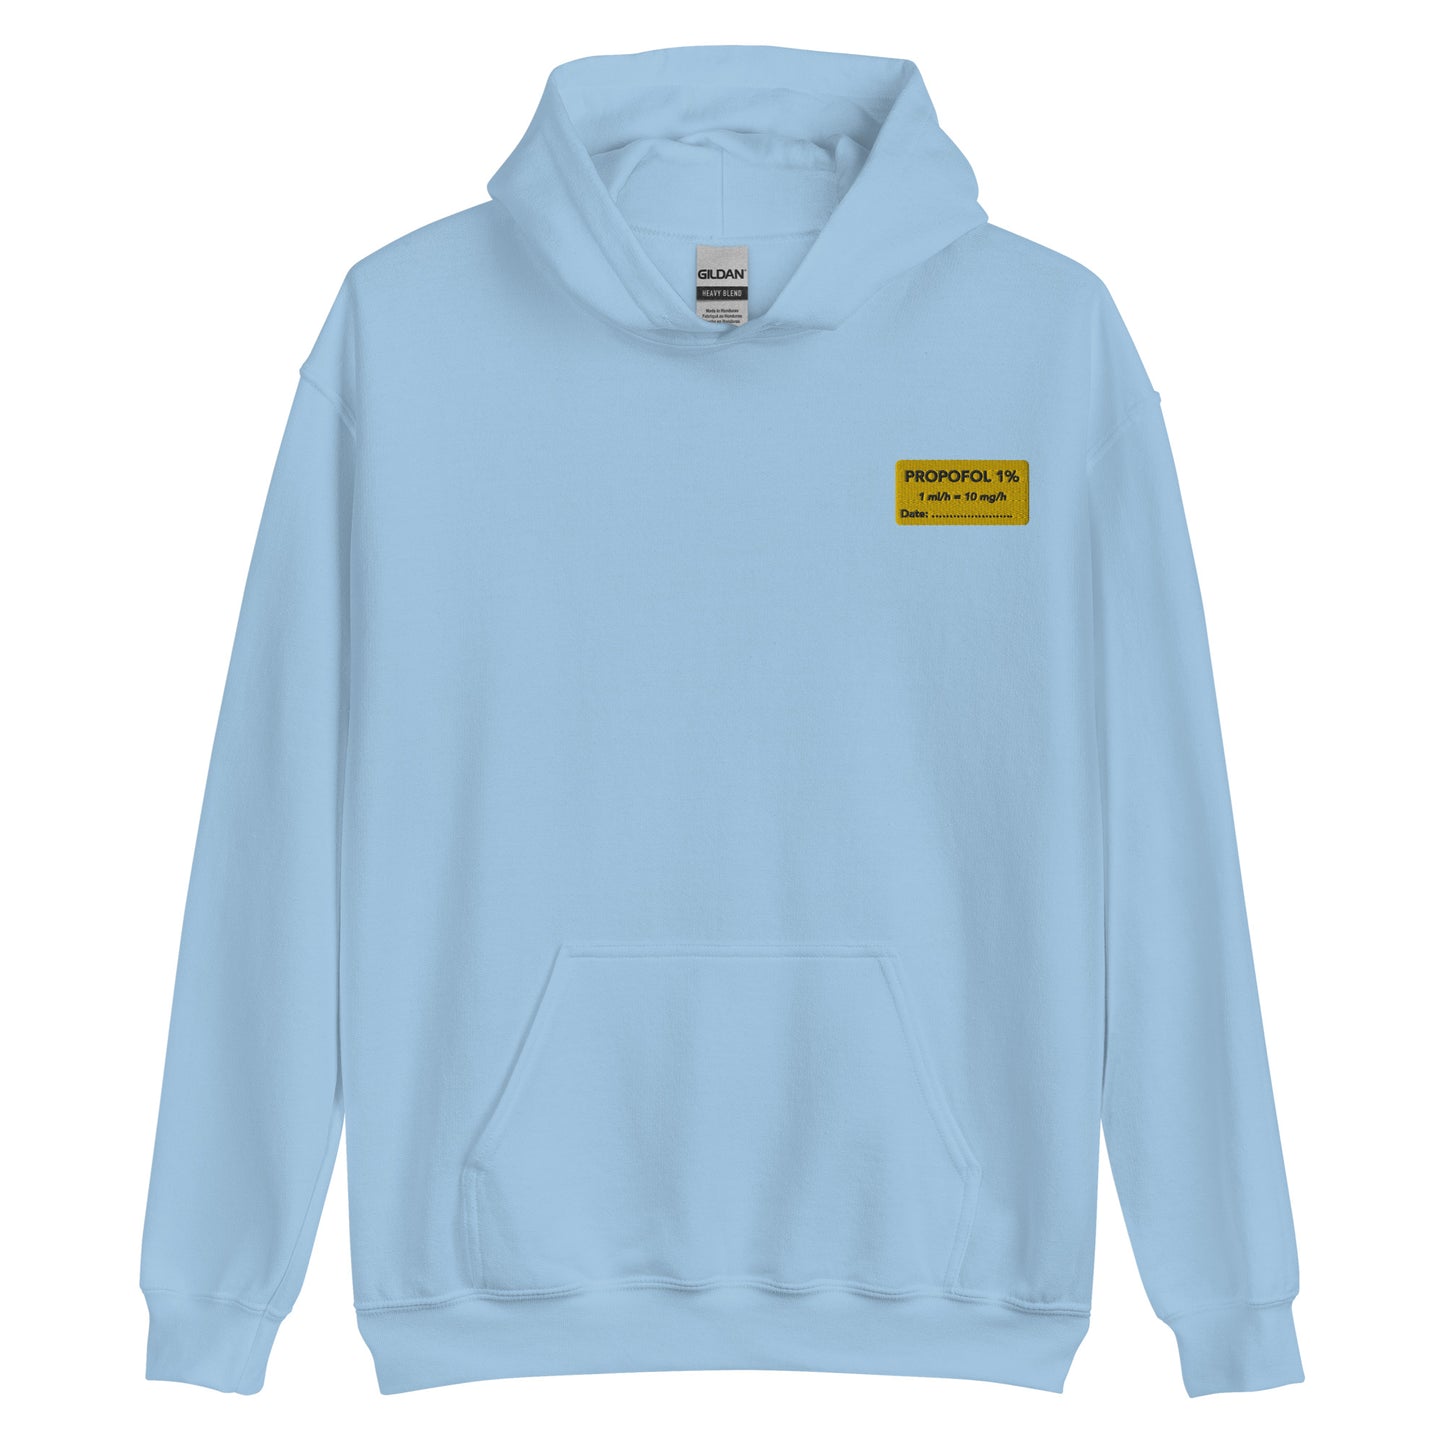 Propofol Embroidered Hoodie